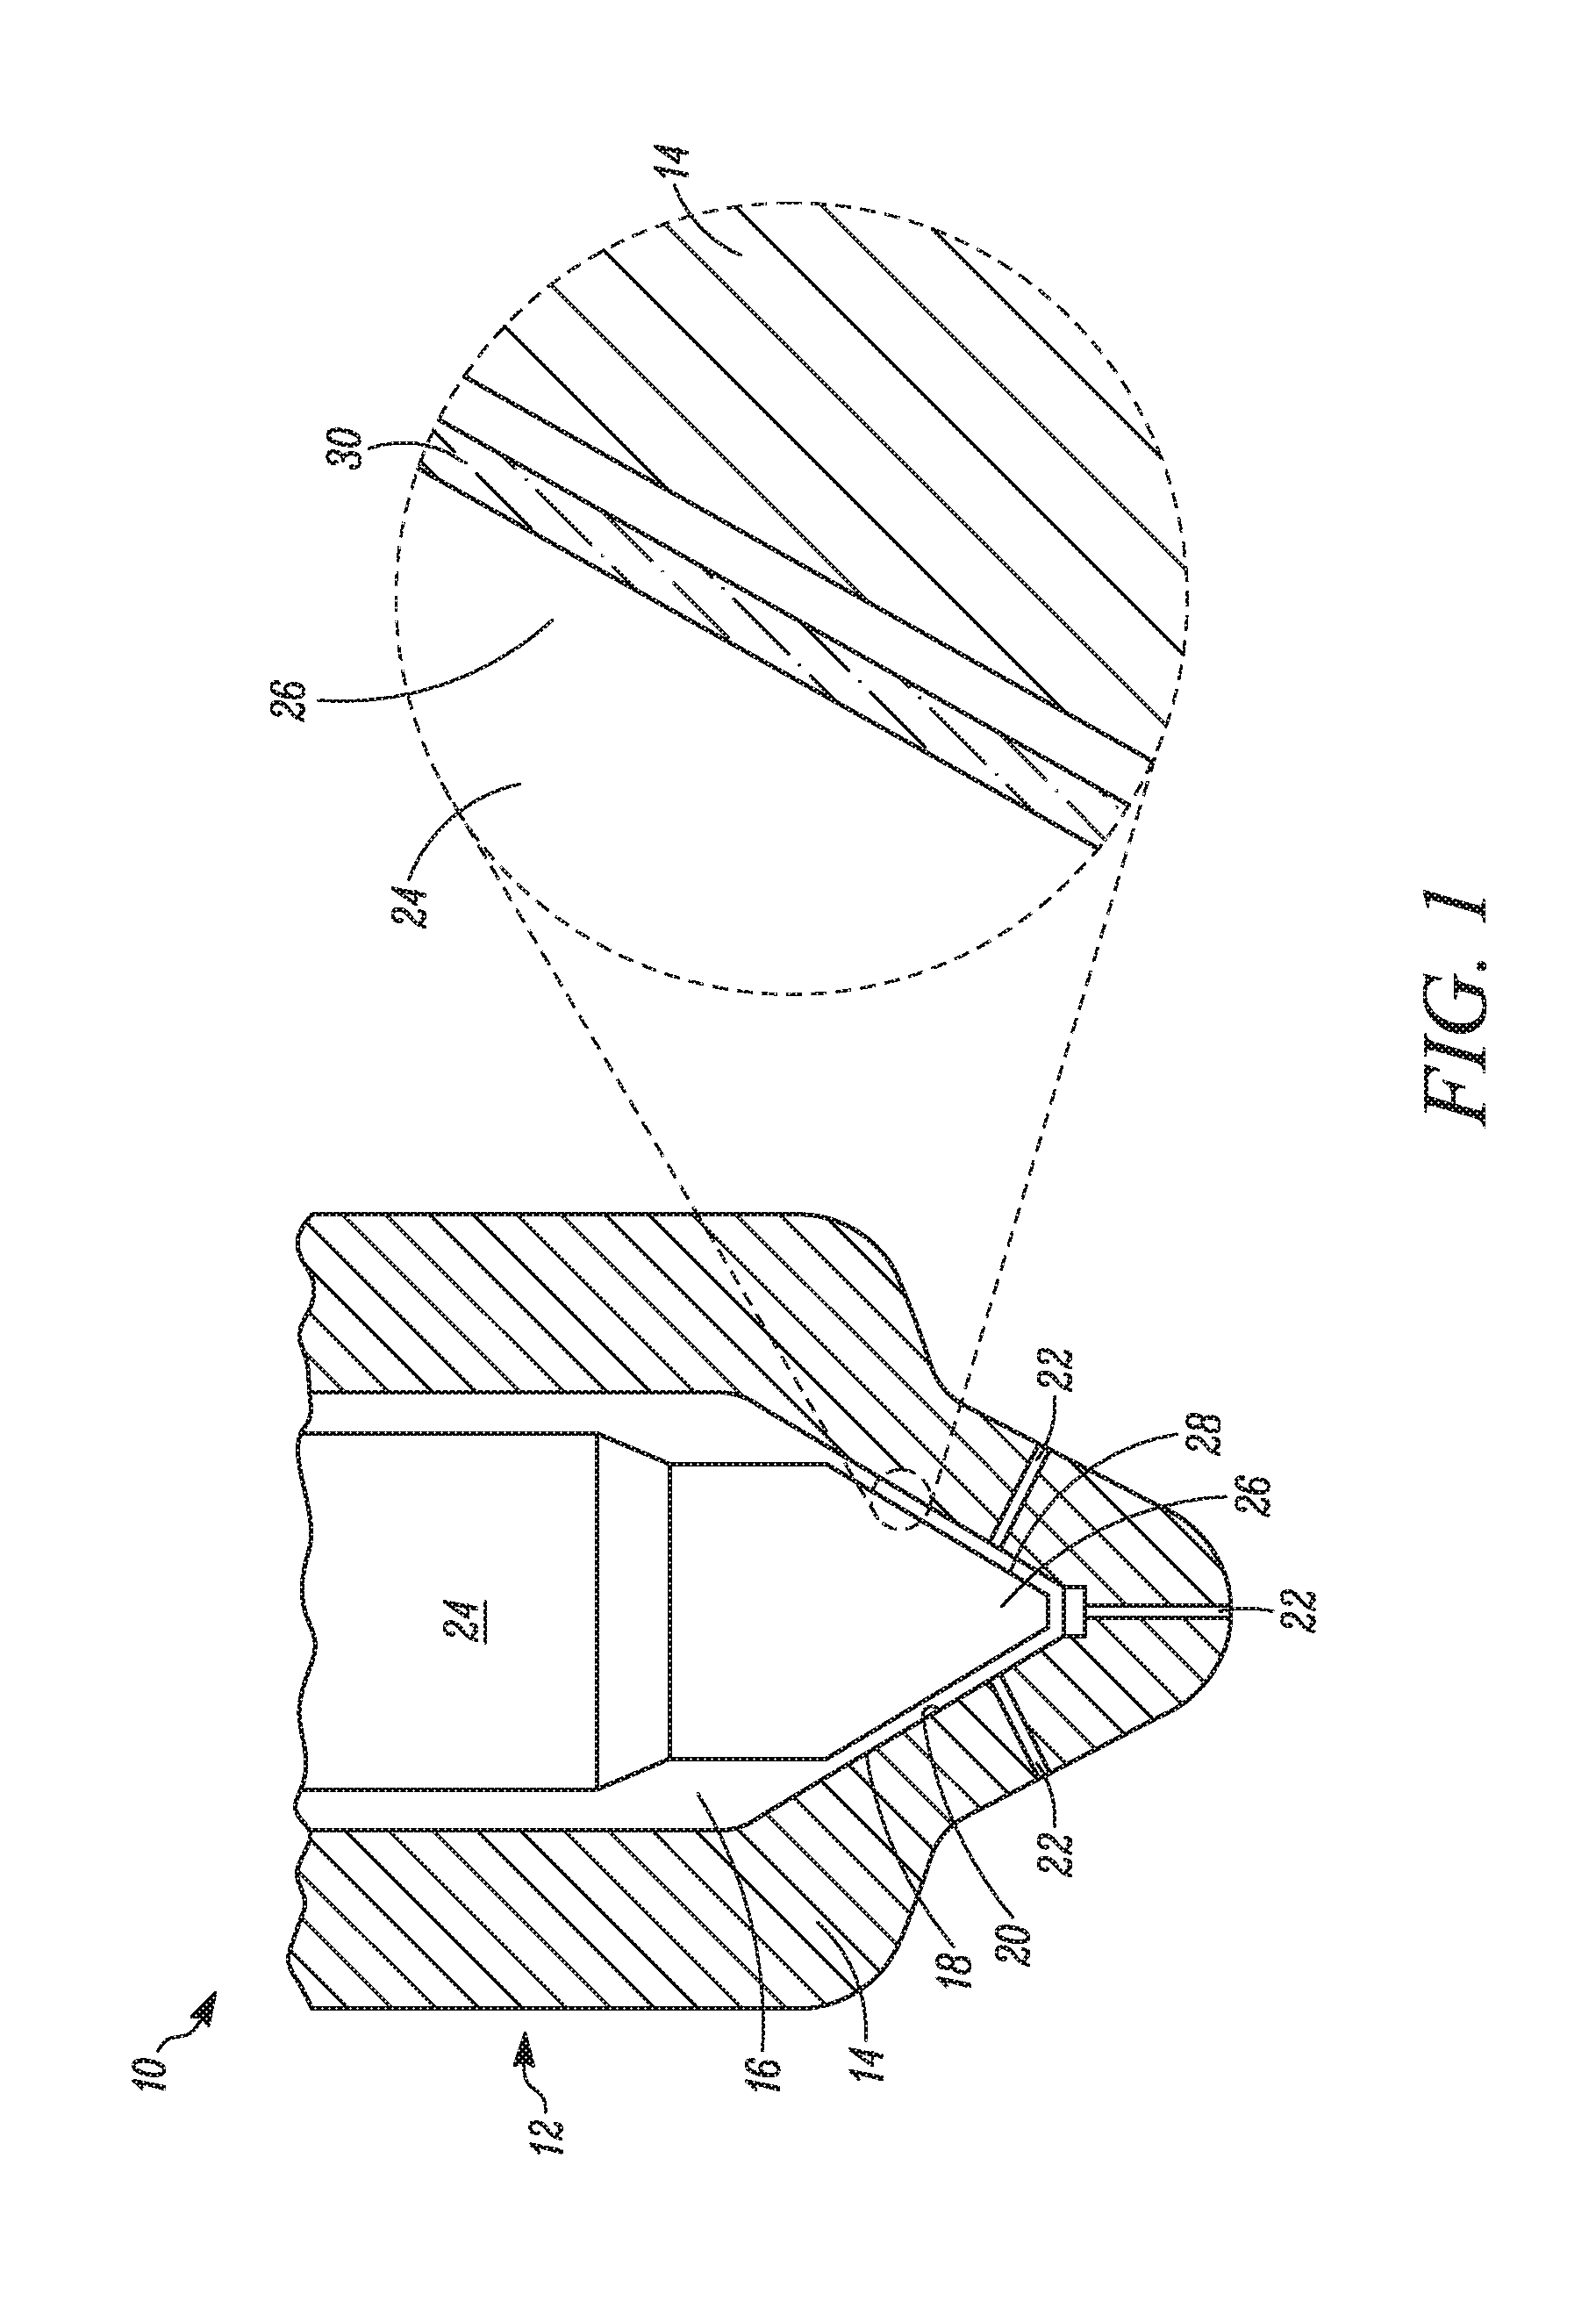 Multilayer coating for a component